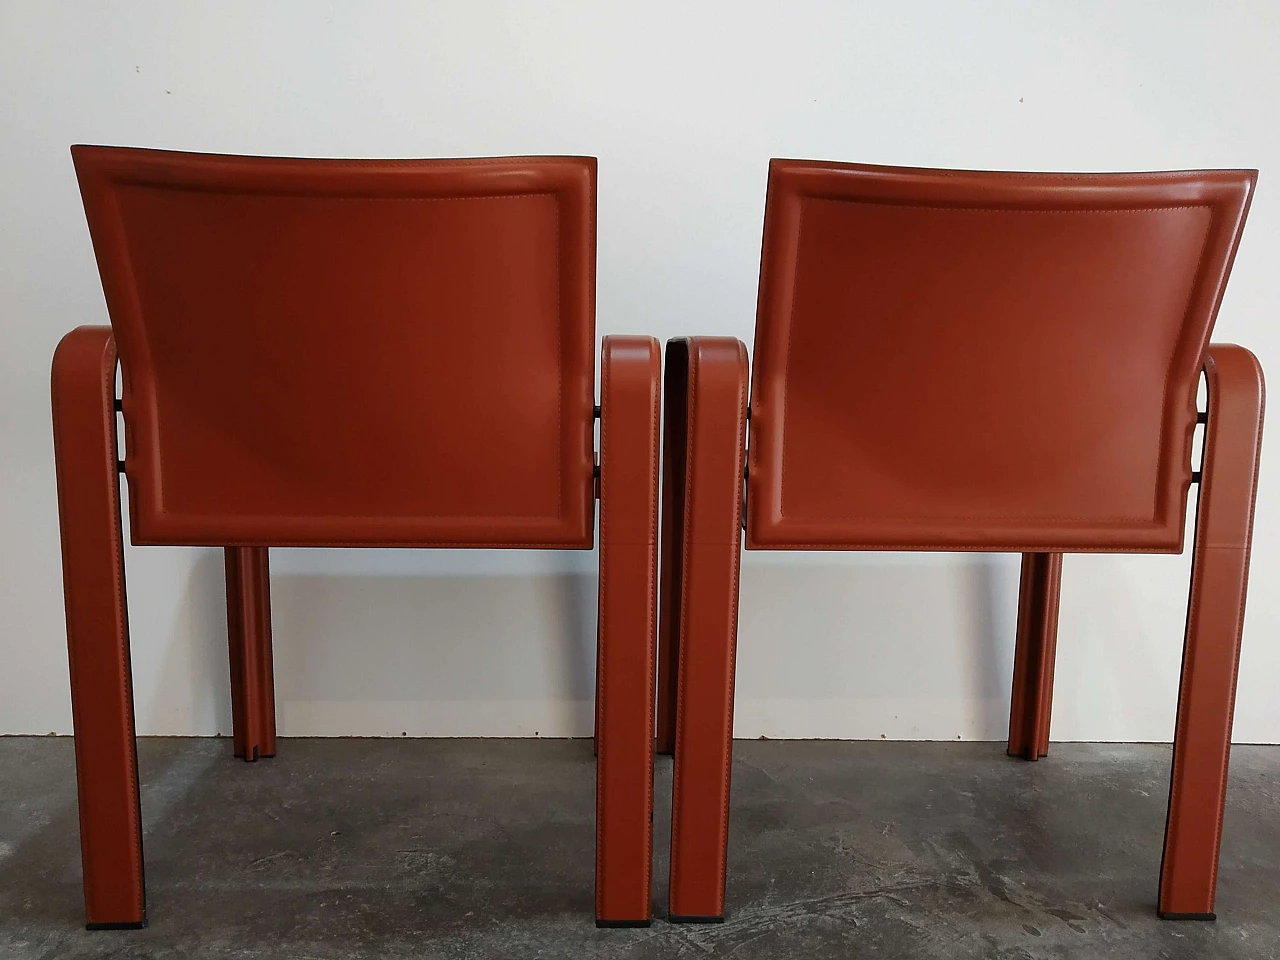 Pair of Golfo dei Poeti chairs by Toussaint & Angeloni manufactured by Matteo Grassi, 1980s 70